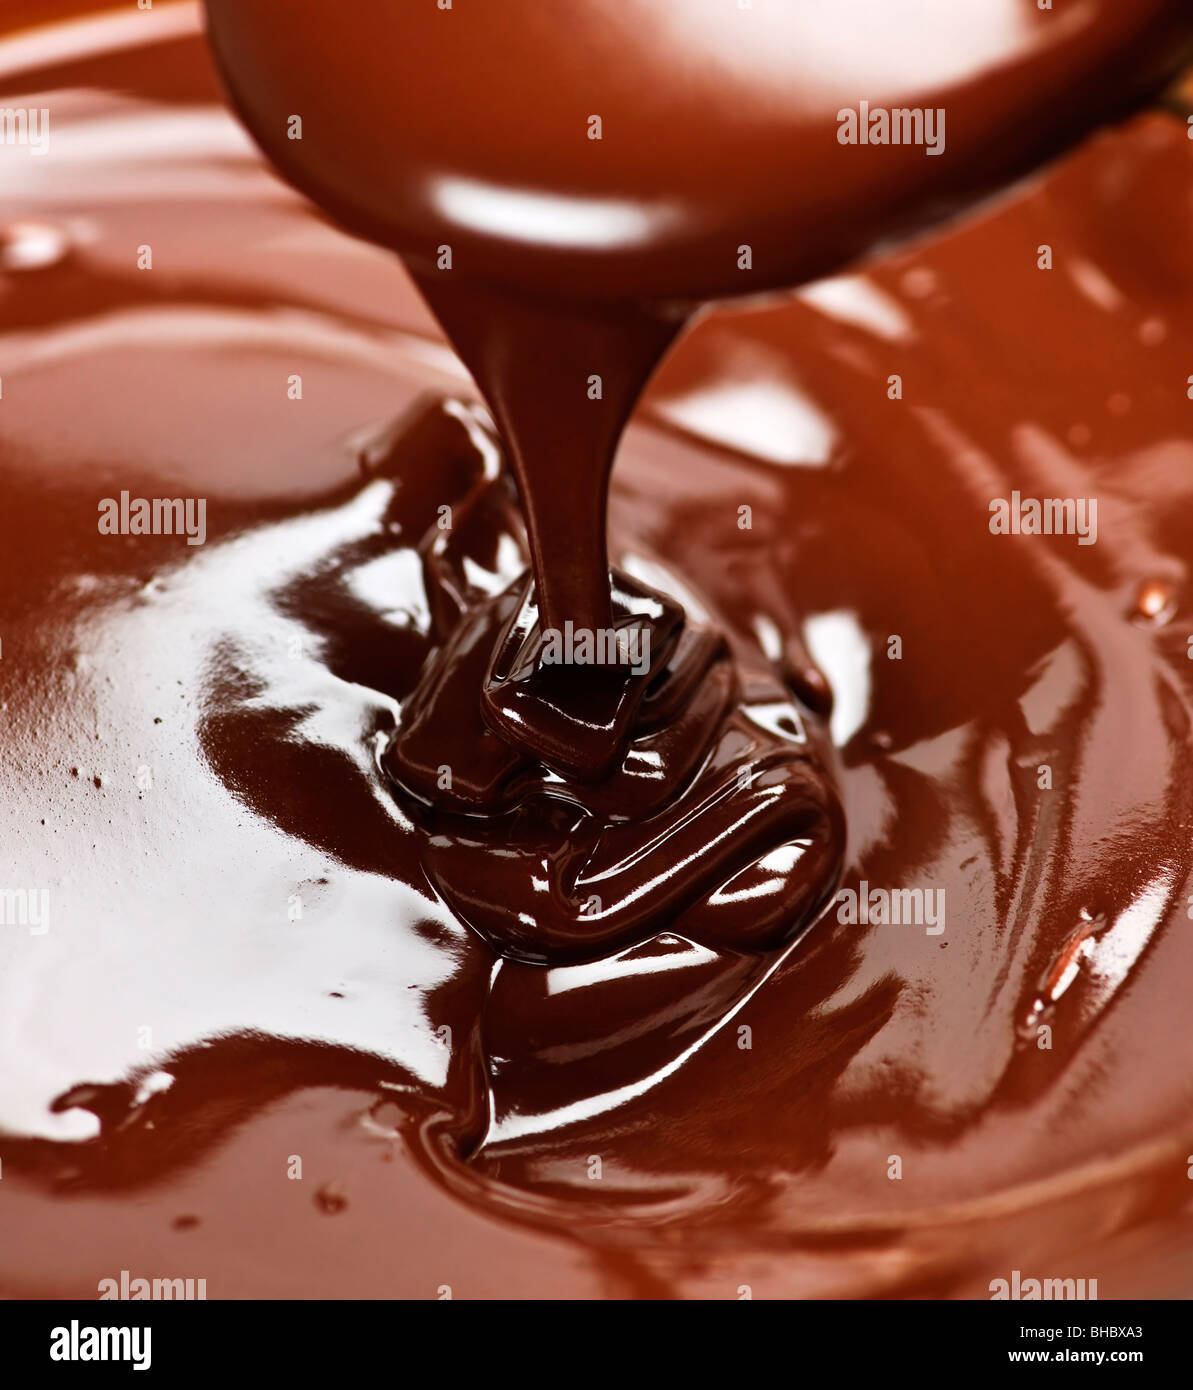 Melted rich dark chocolate dripping from spoon Stock Photo